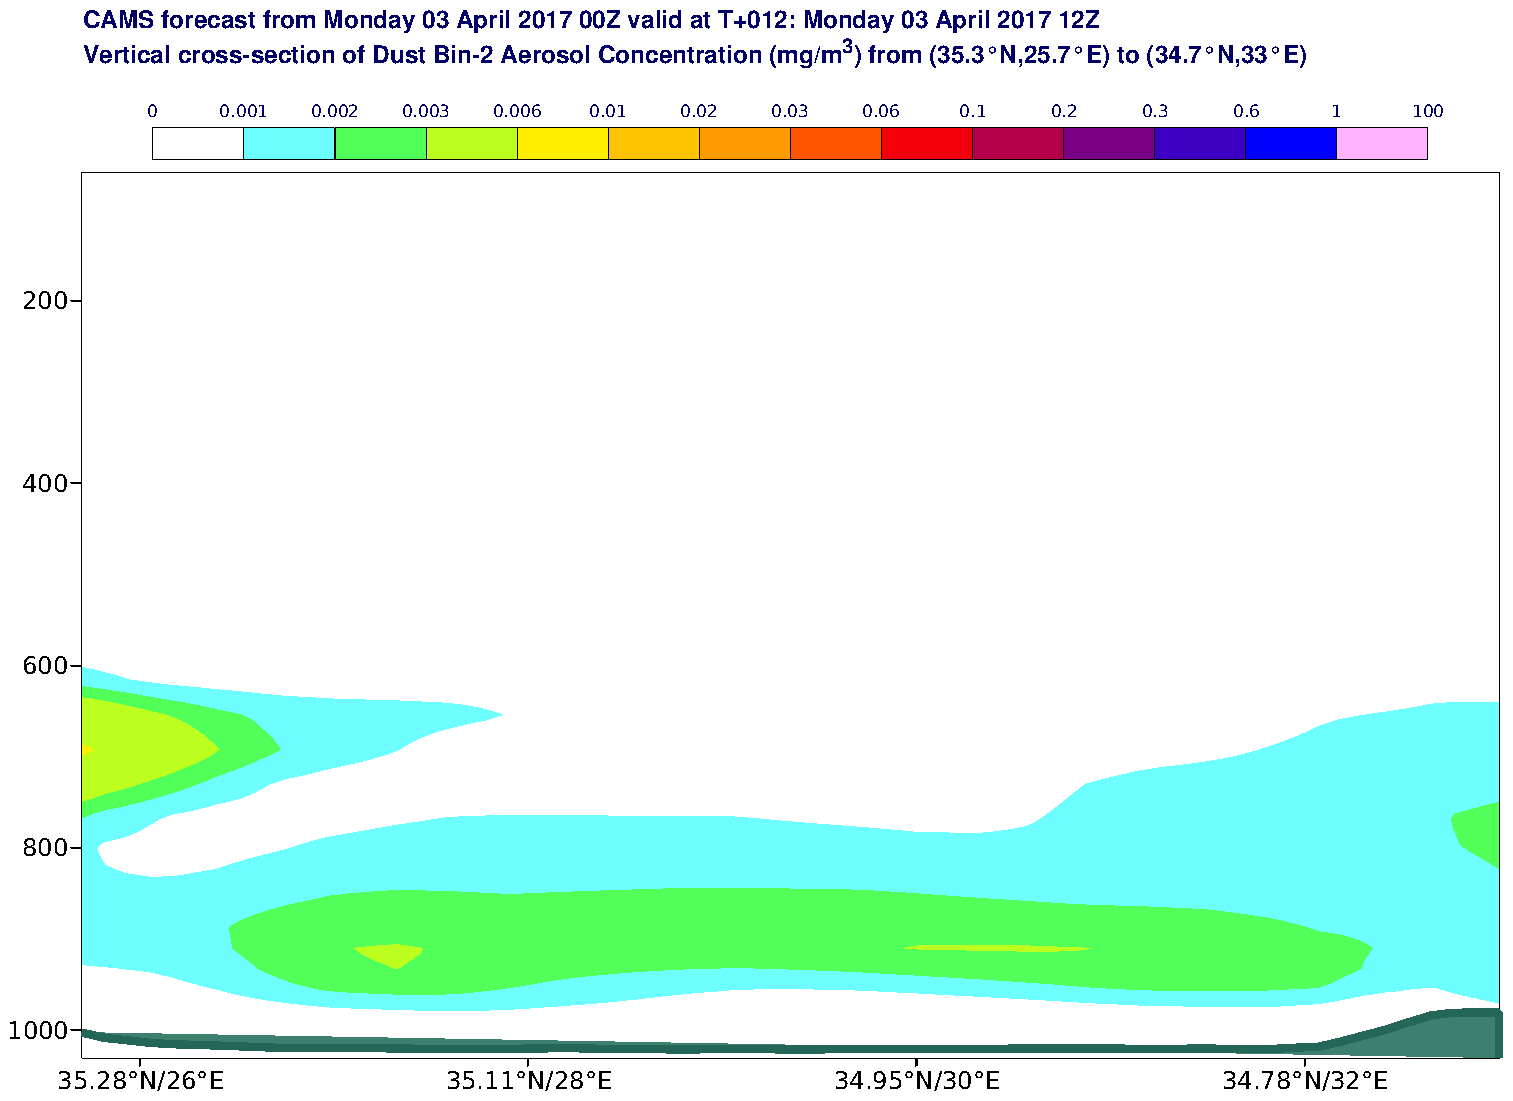 Vertical cross-section of Dust Bin-2 Aerosol Concentration (mg/m3) valid at T12 - 2017-04-03 12:00